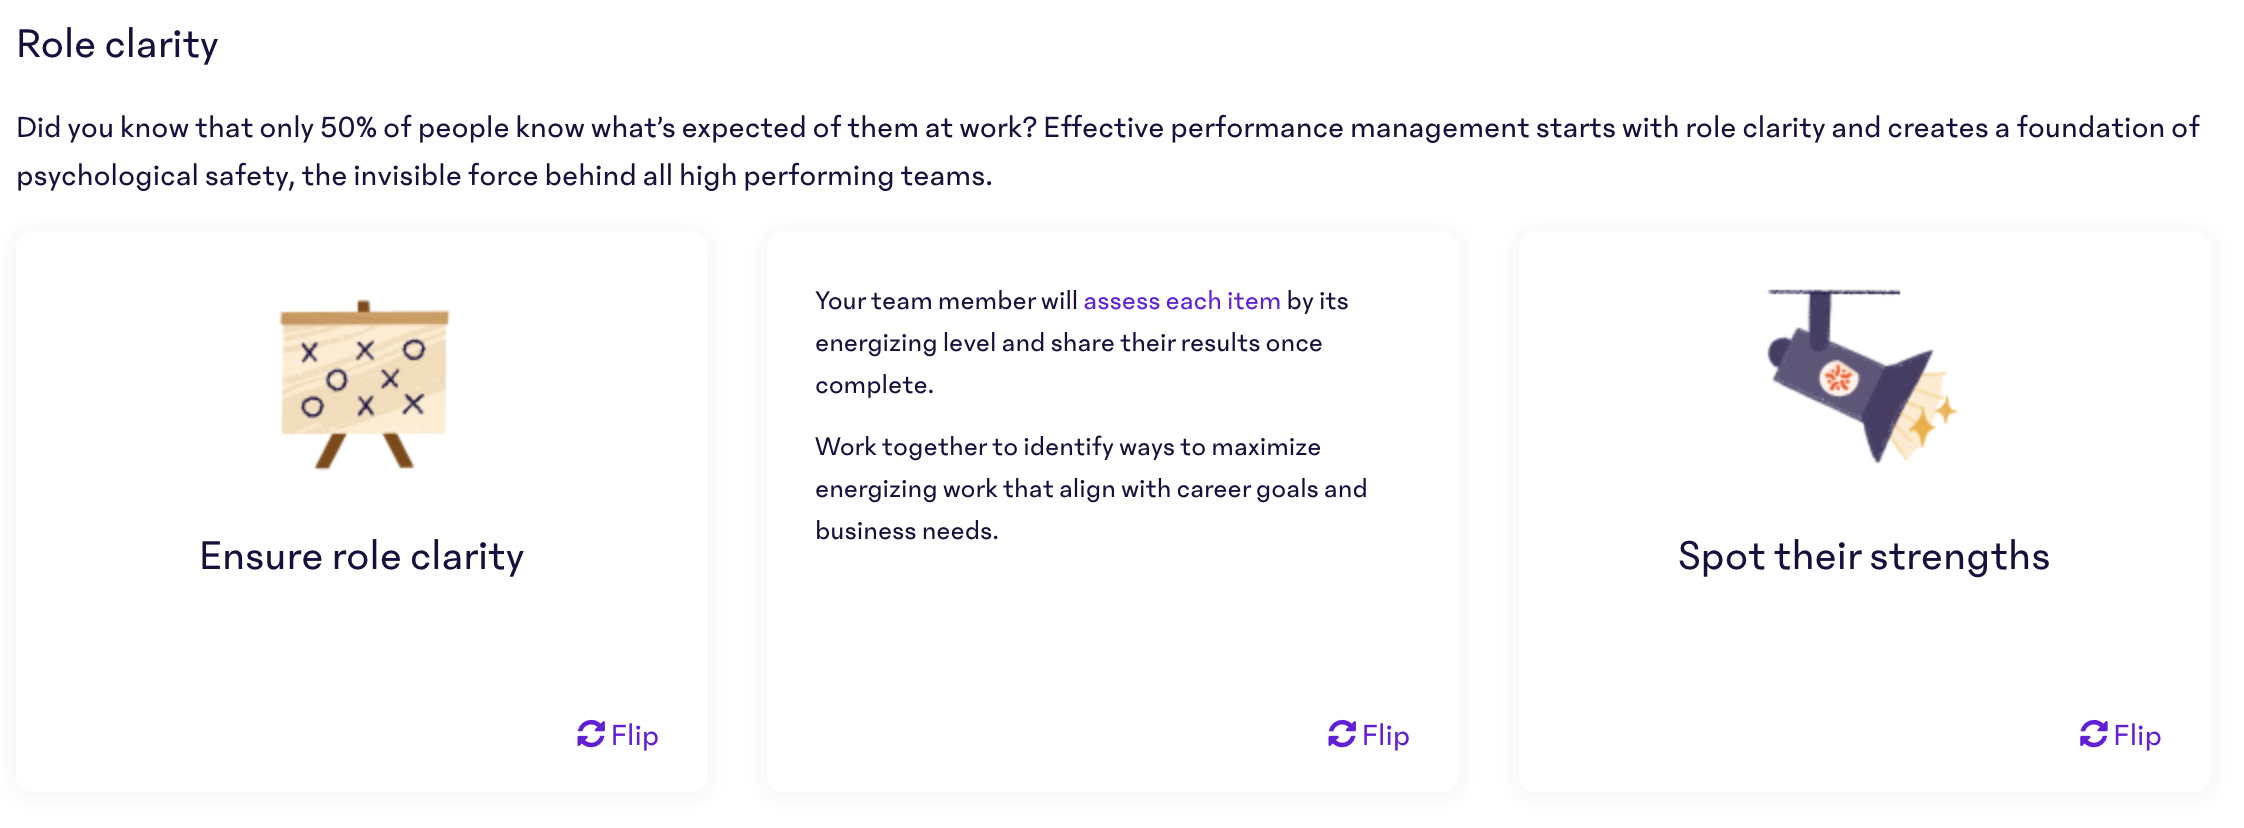 Role-Clarity-Goals-Manager.png